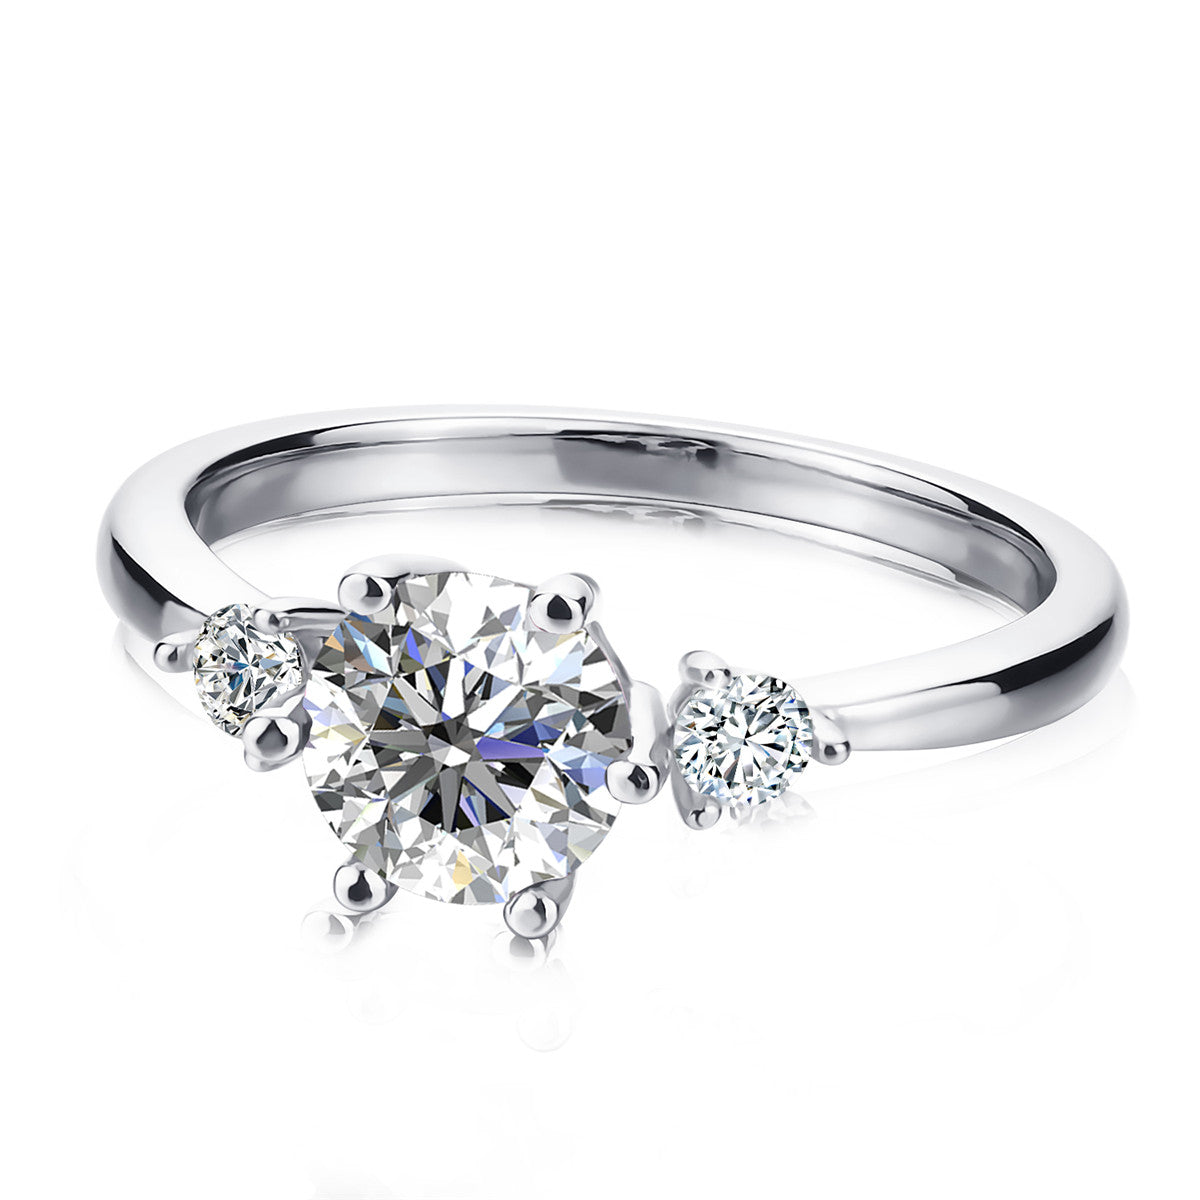 Moissanite by Cate & Chloe Sarah Sterling Silver Ring with Moissanite and 5A Cubic Zirconia Crystals